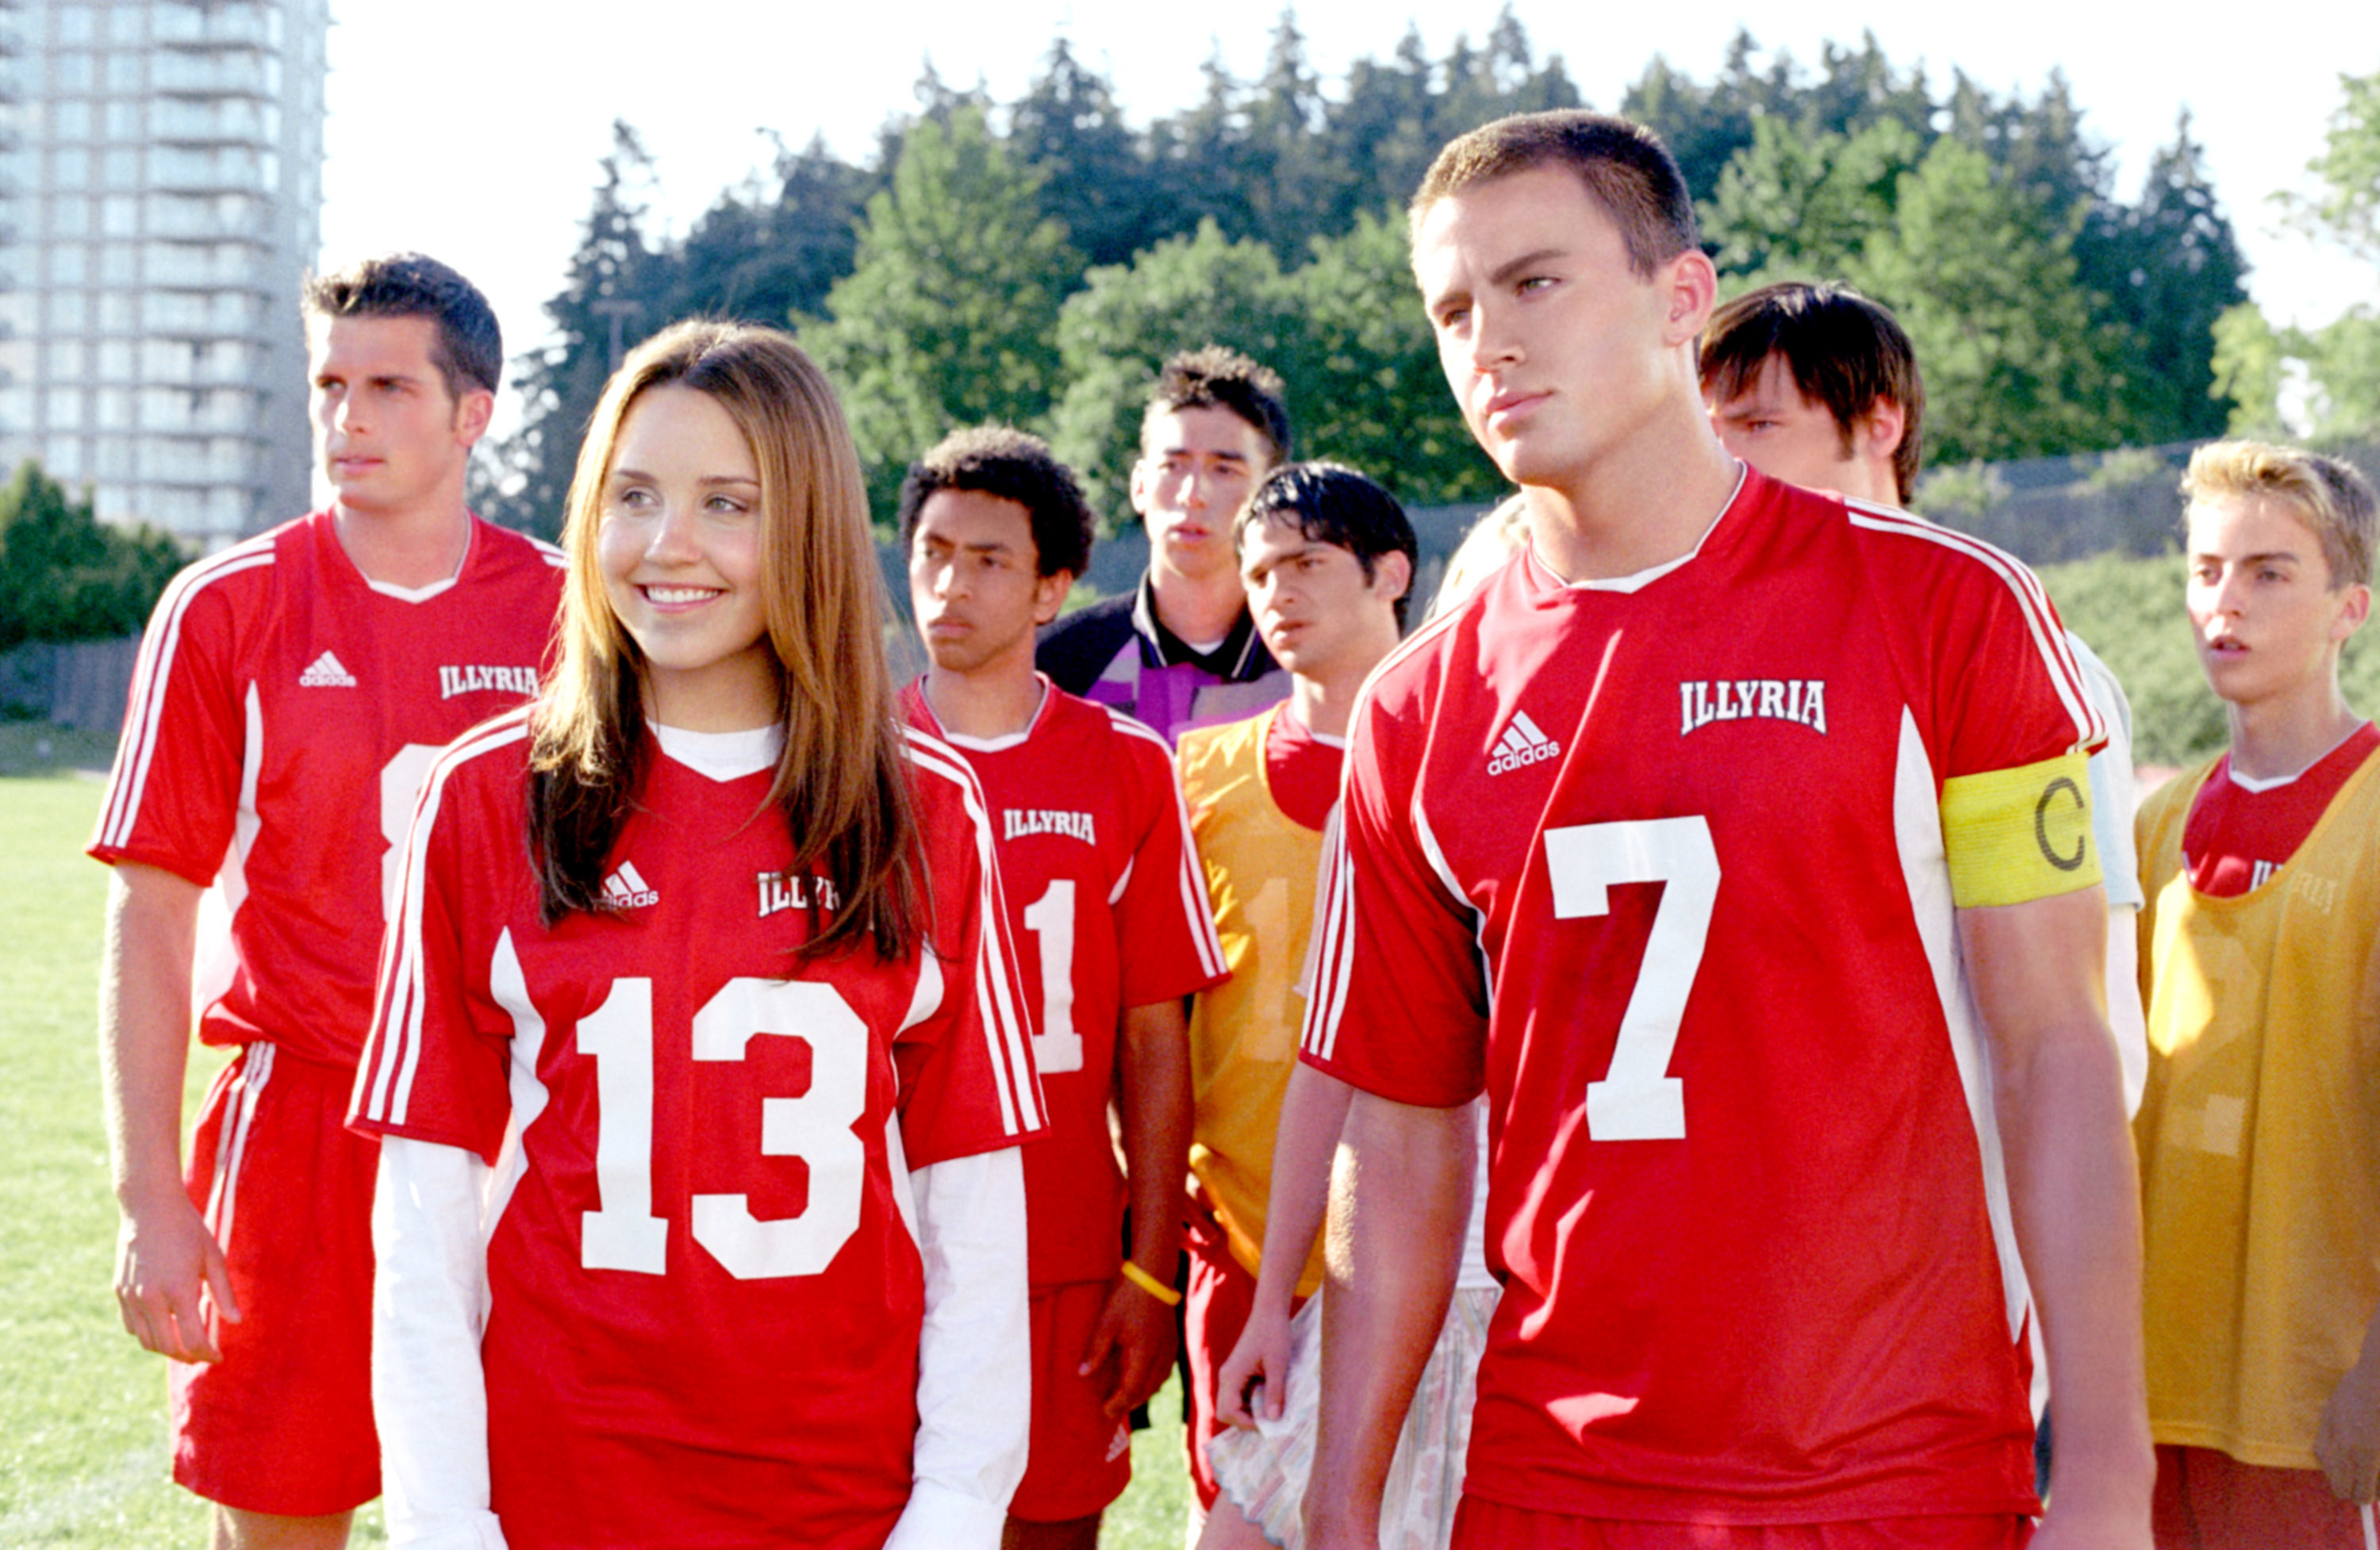 Viola (Amanda Bynes) and Duke and others in sports team uniforms